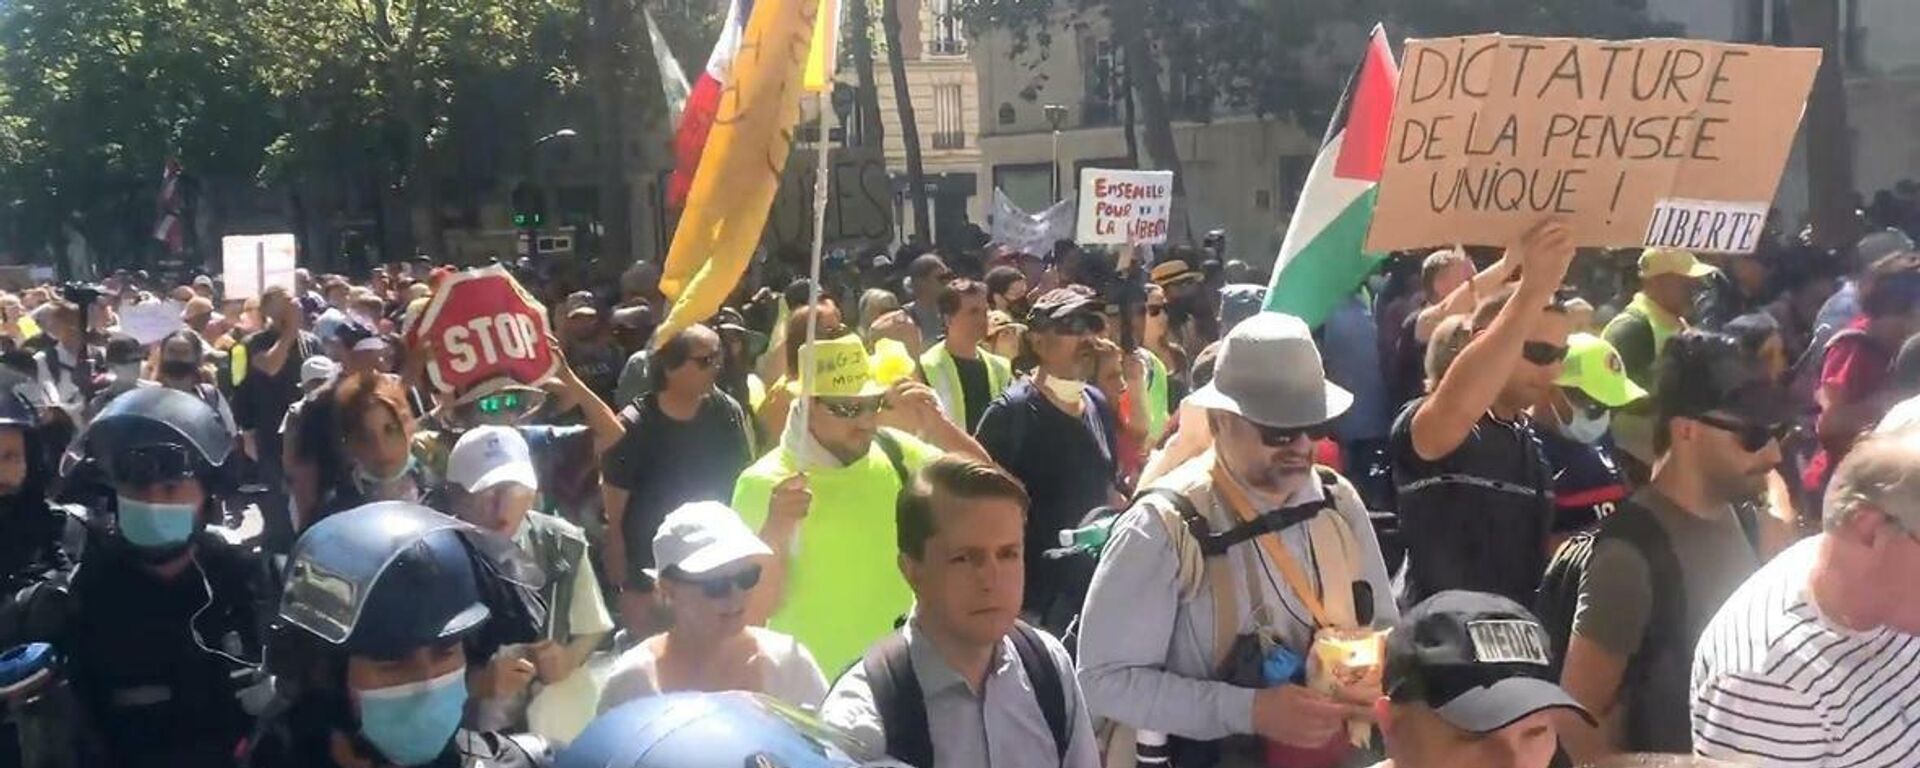 France: Protesters take to Paris streets against COVID health pass for 5th weekend - Sputnik Moldova-România, 1920, 15.08.2021